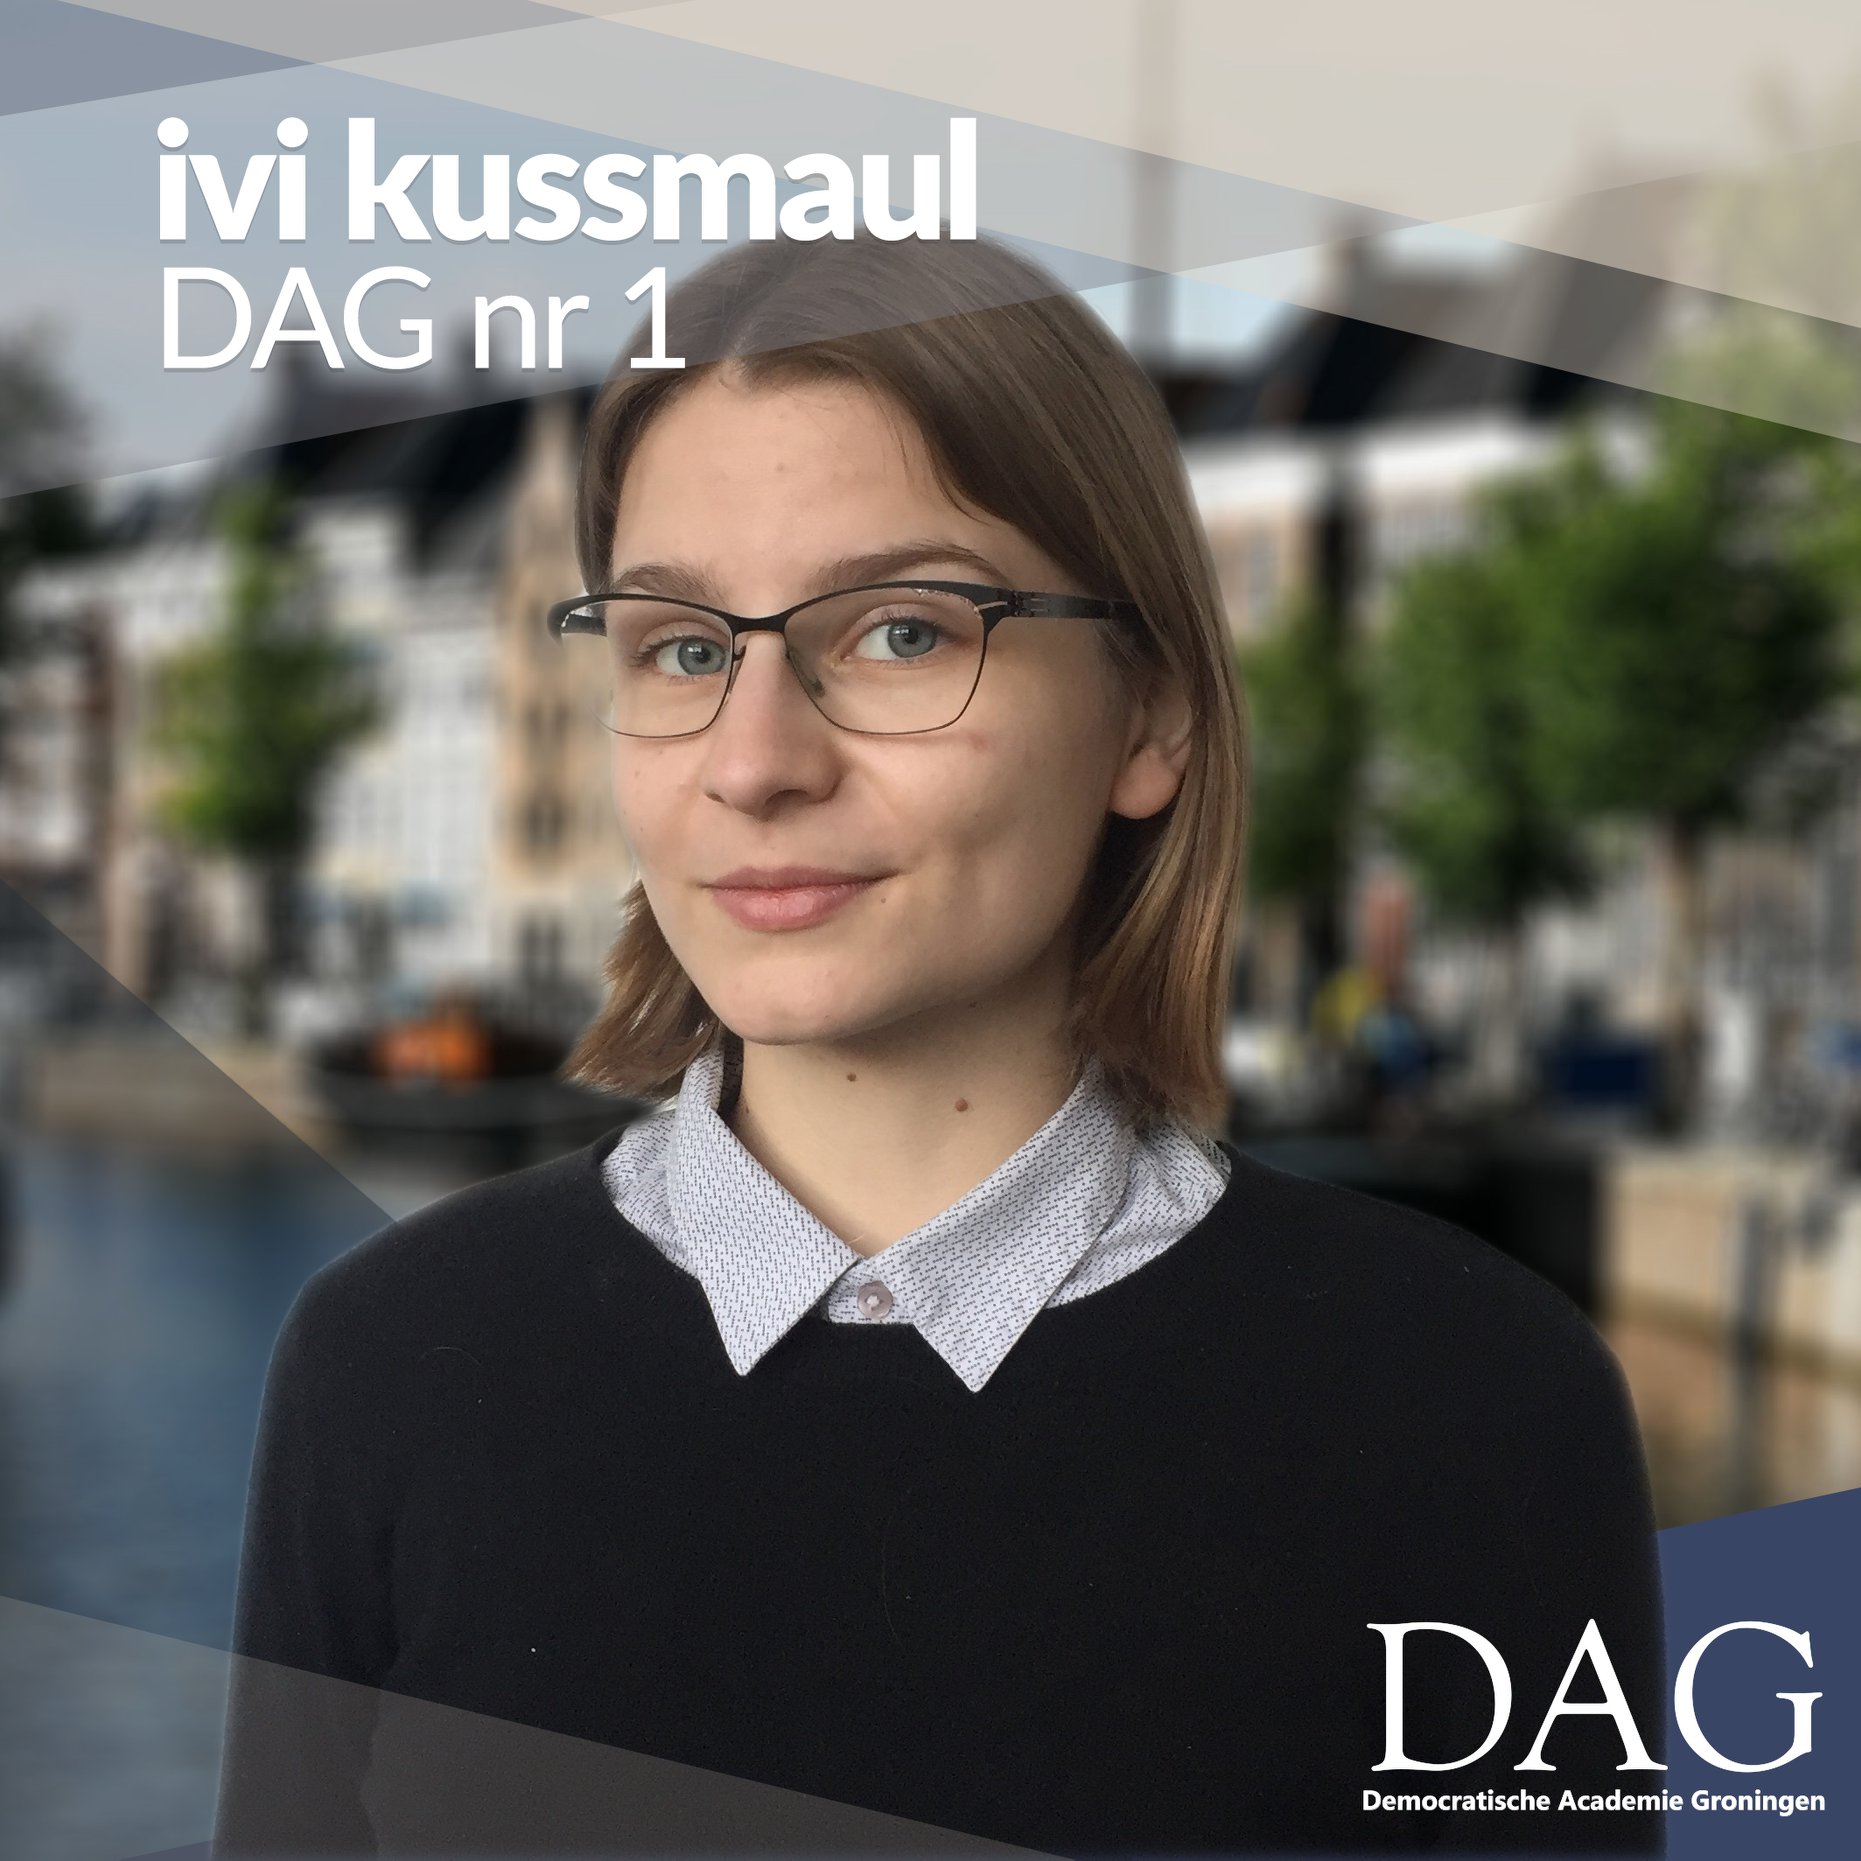 DAG's lead candidate is Ivi Kussmaul